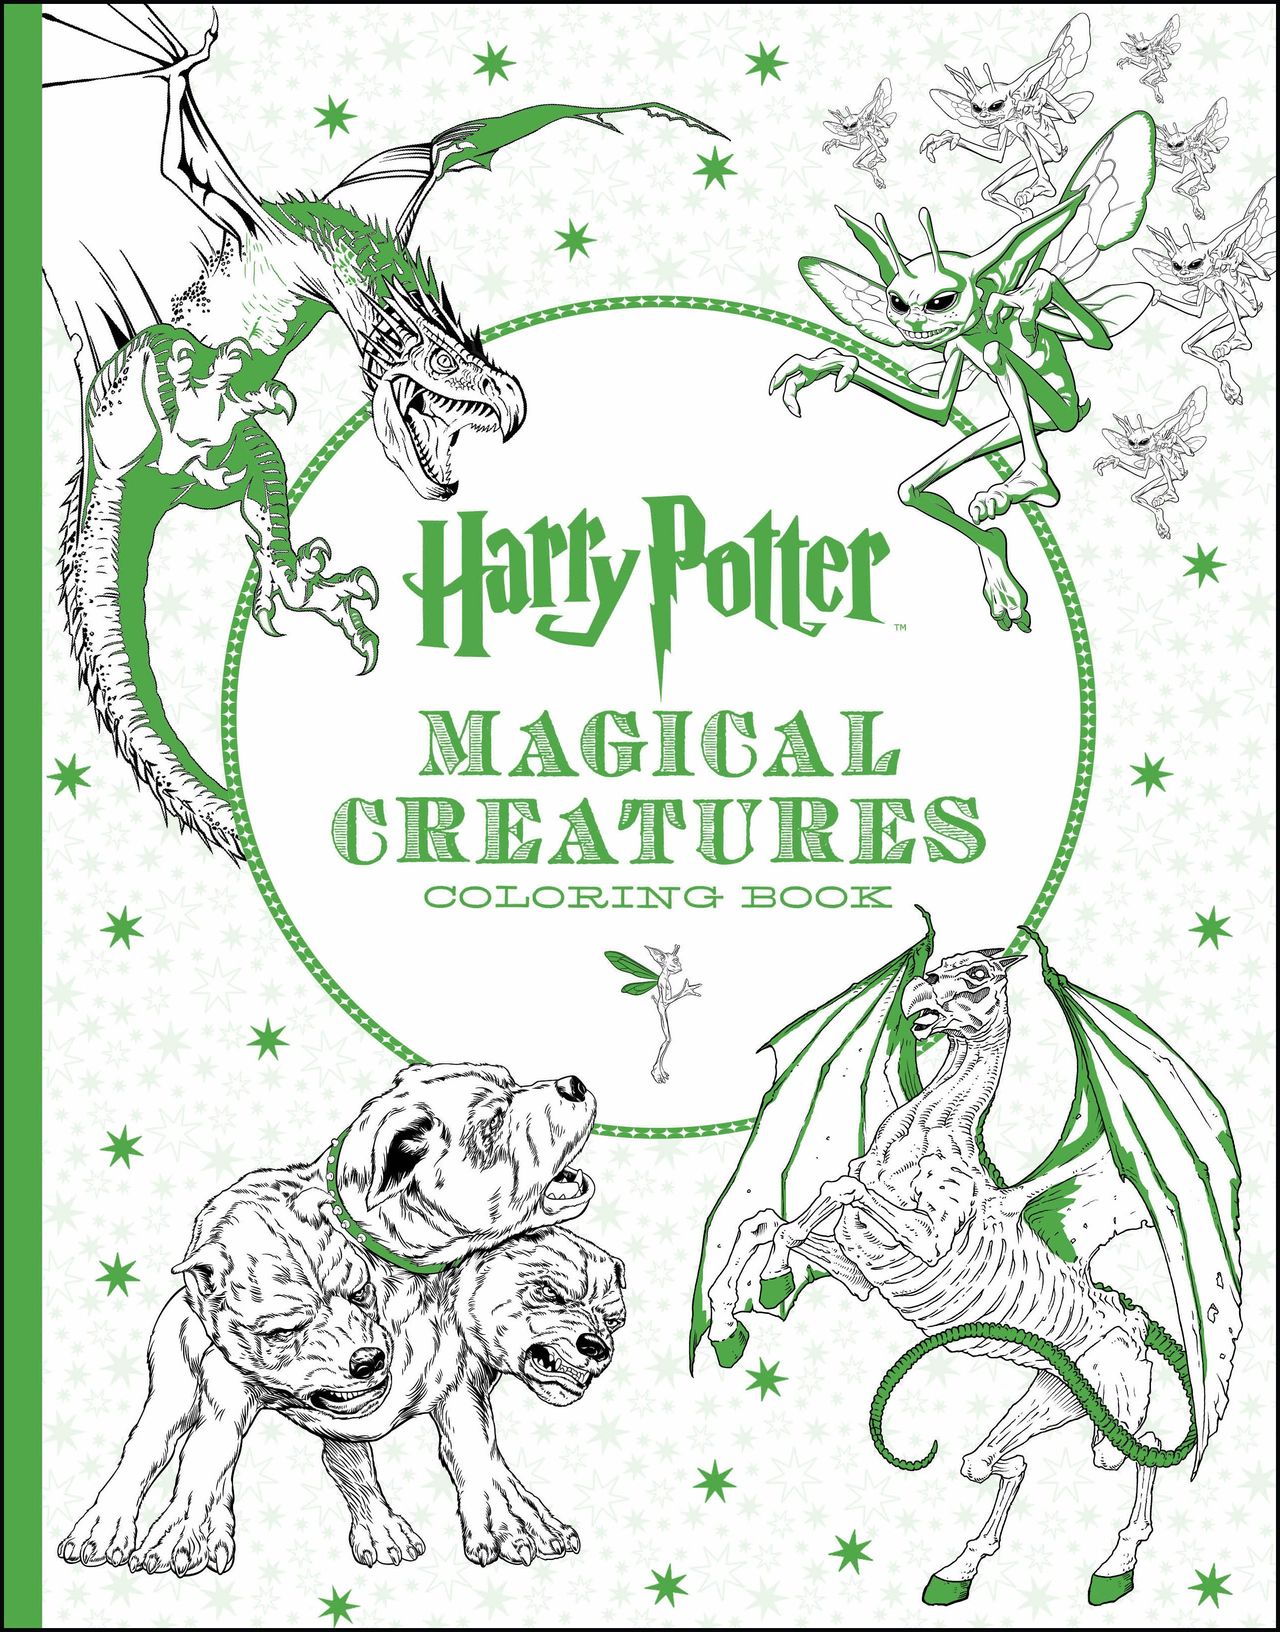 Can't wait for "Fantastic Beasts and Where to Find Them"? Color your impatience away.